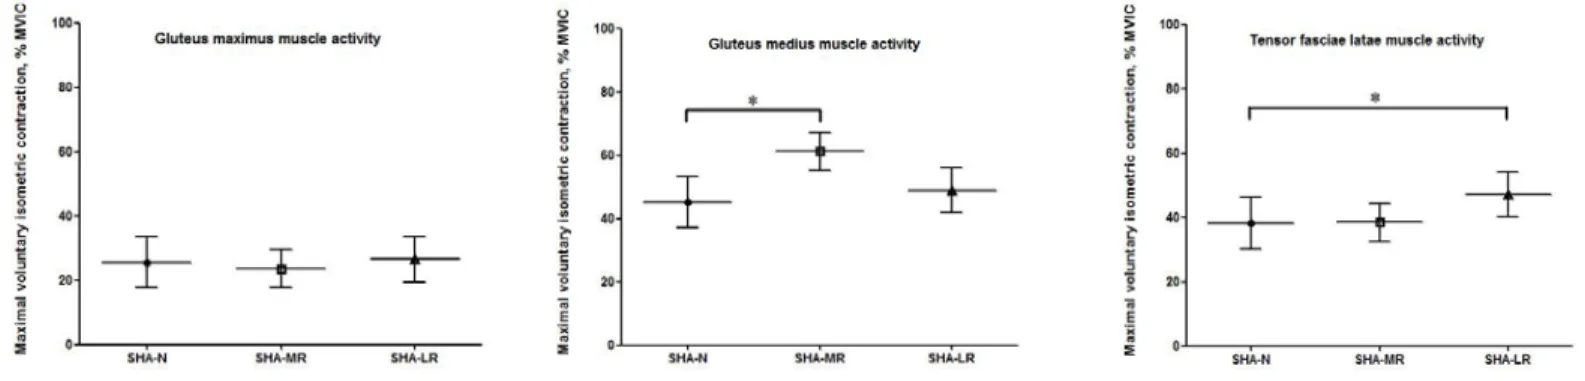 Figure 5. Comparison of muscle activity in the gluteus maximus, medius, and the tensor fasciae latae among different hip  rotations during side-lying hip abduction exercises